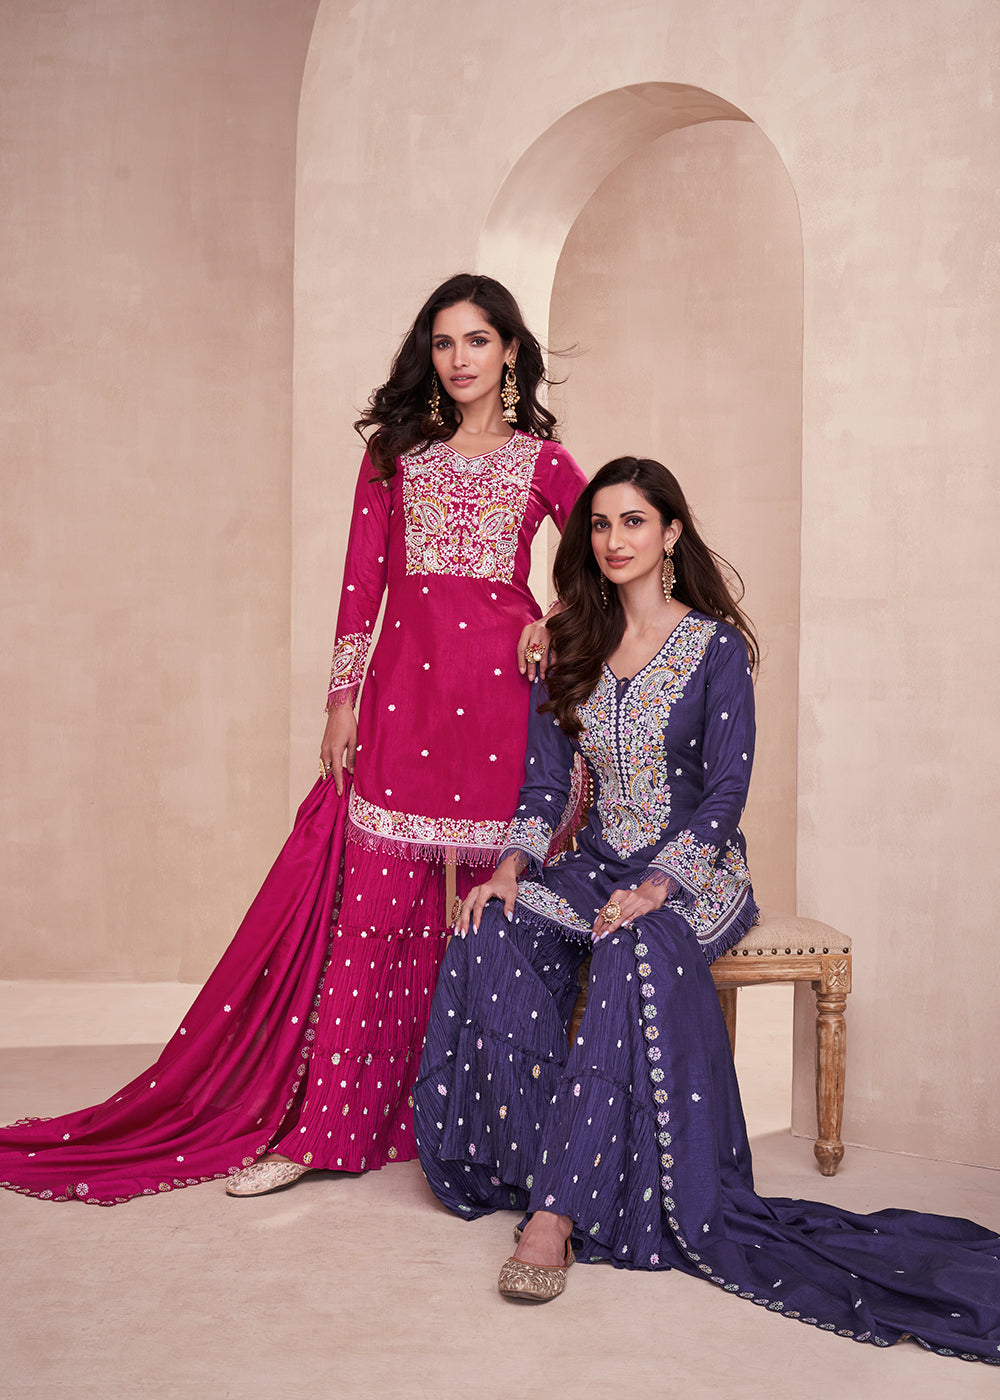 Buy Now Dola Silk Pleasing Purple Embroidered Designer Palazzo Suit Online in USA, UK, Canada, Germany, Australia & Worldwide at Empress Clothing.